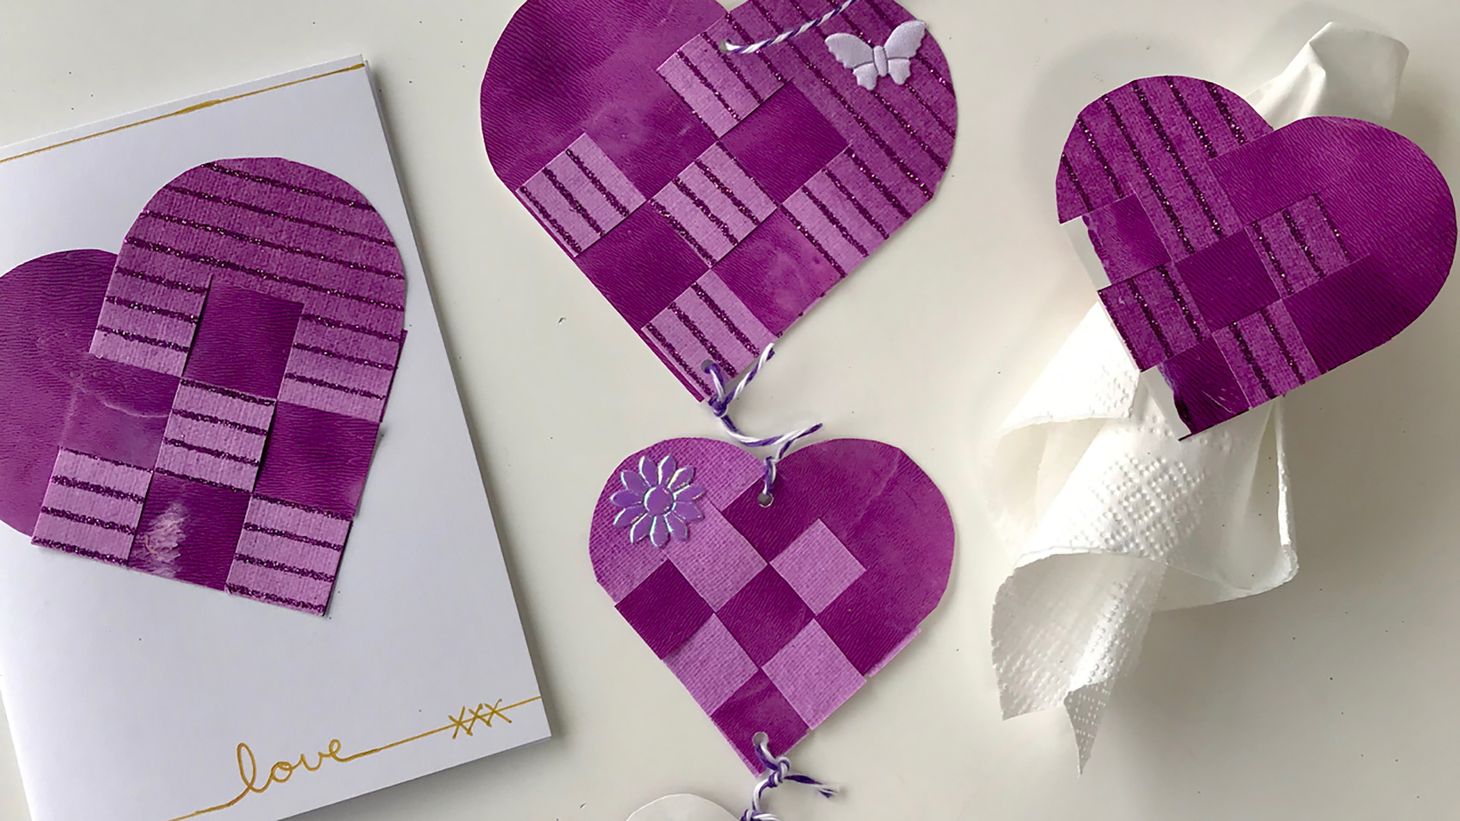 Stuck for a Valentine’s Day gift? Get your kids involved in making this